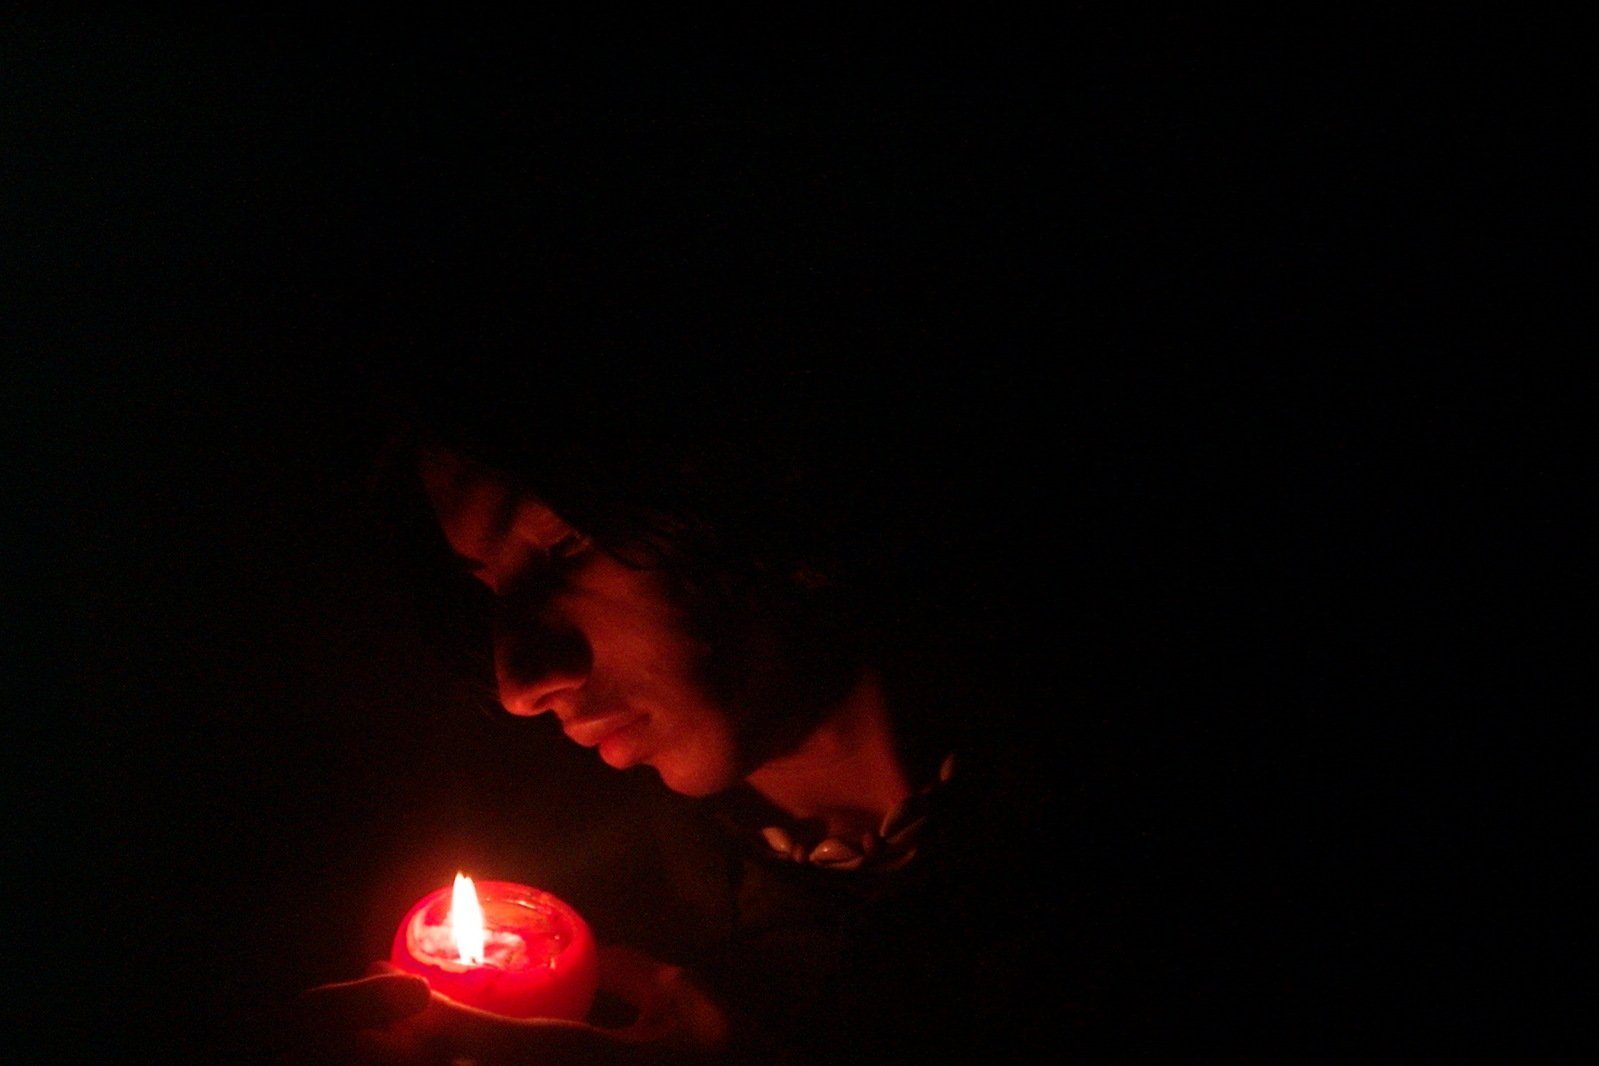 a woman holding a red candle in the dark